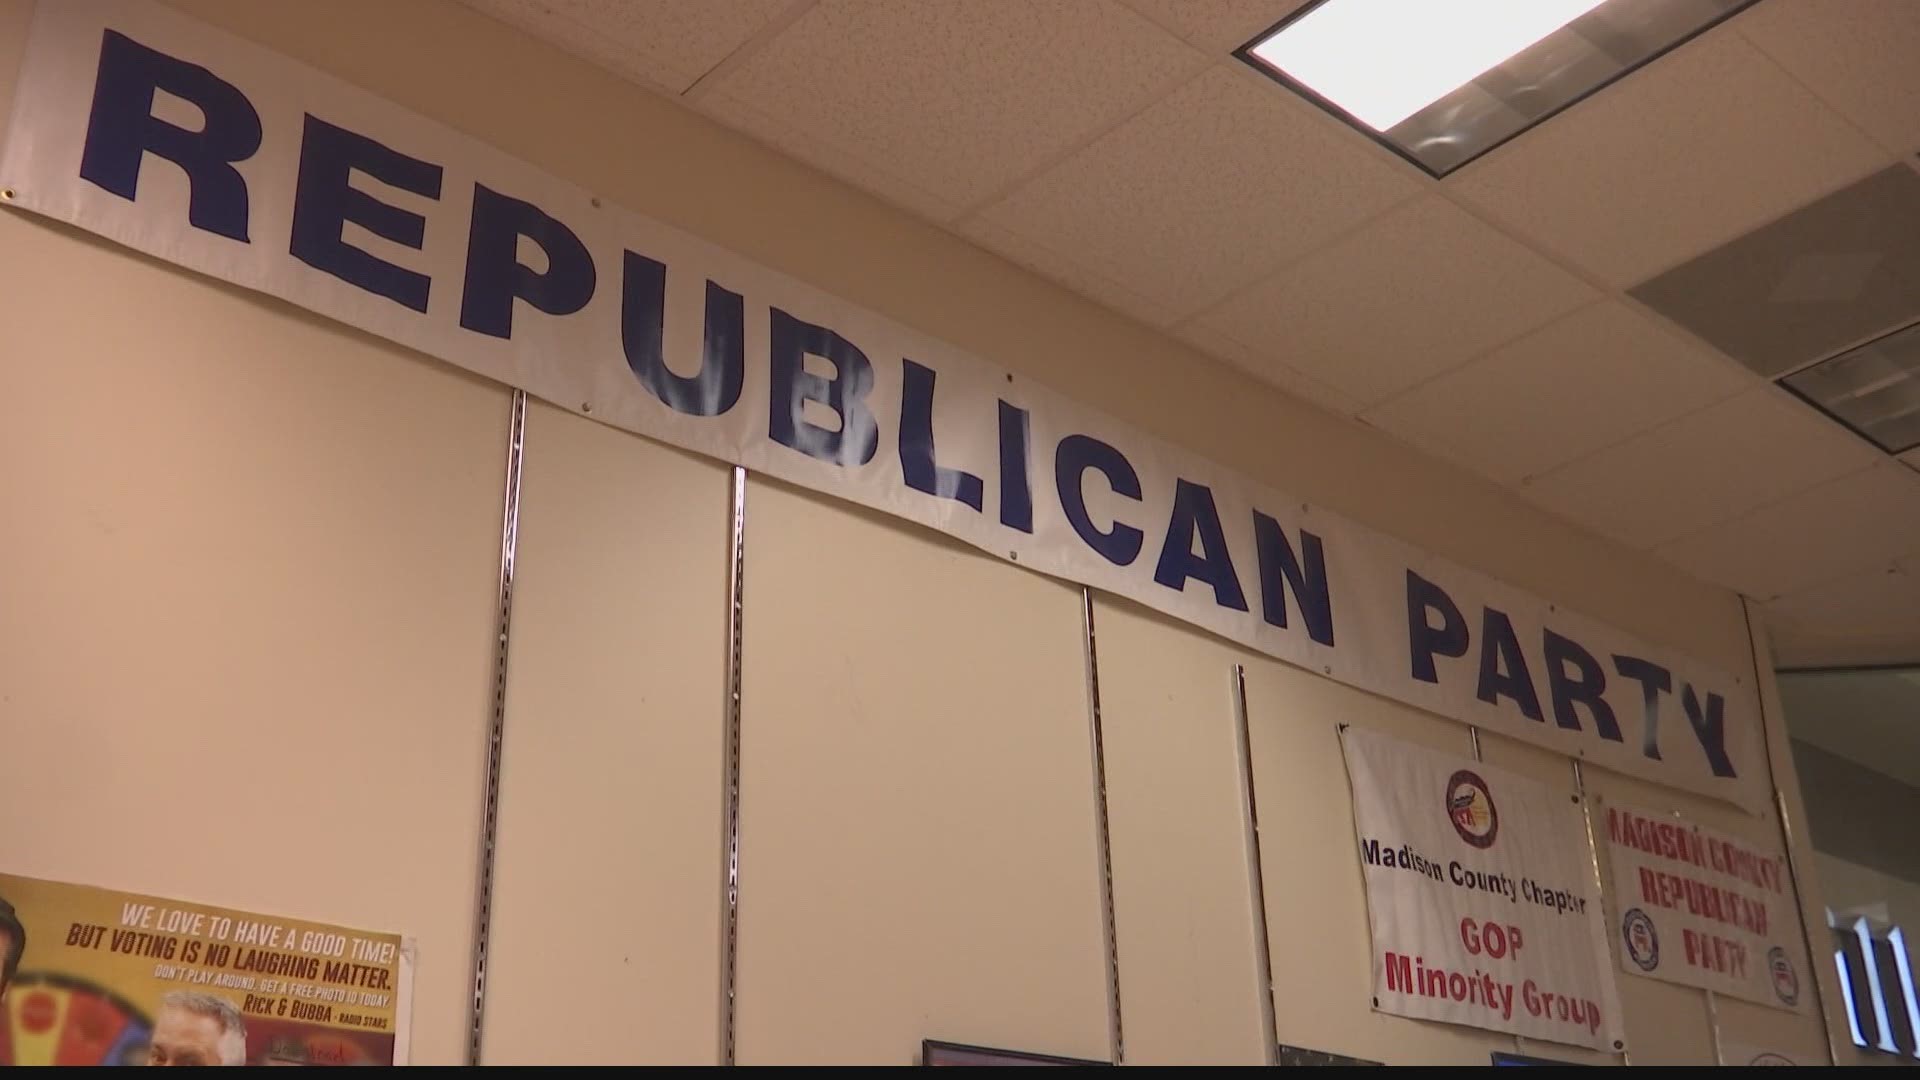 Our team catches up with Alabama Republican candidates and voters on Super Tuesday.